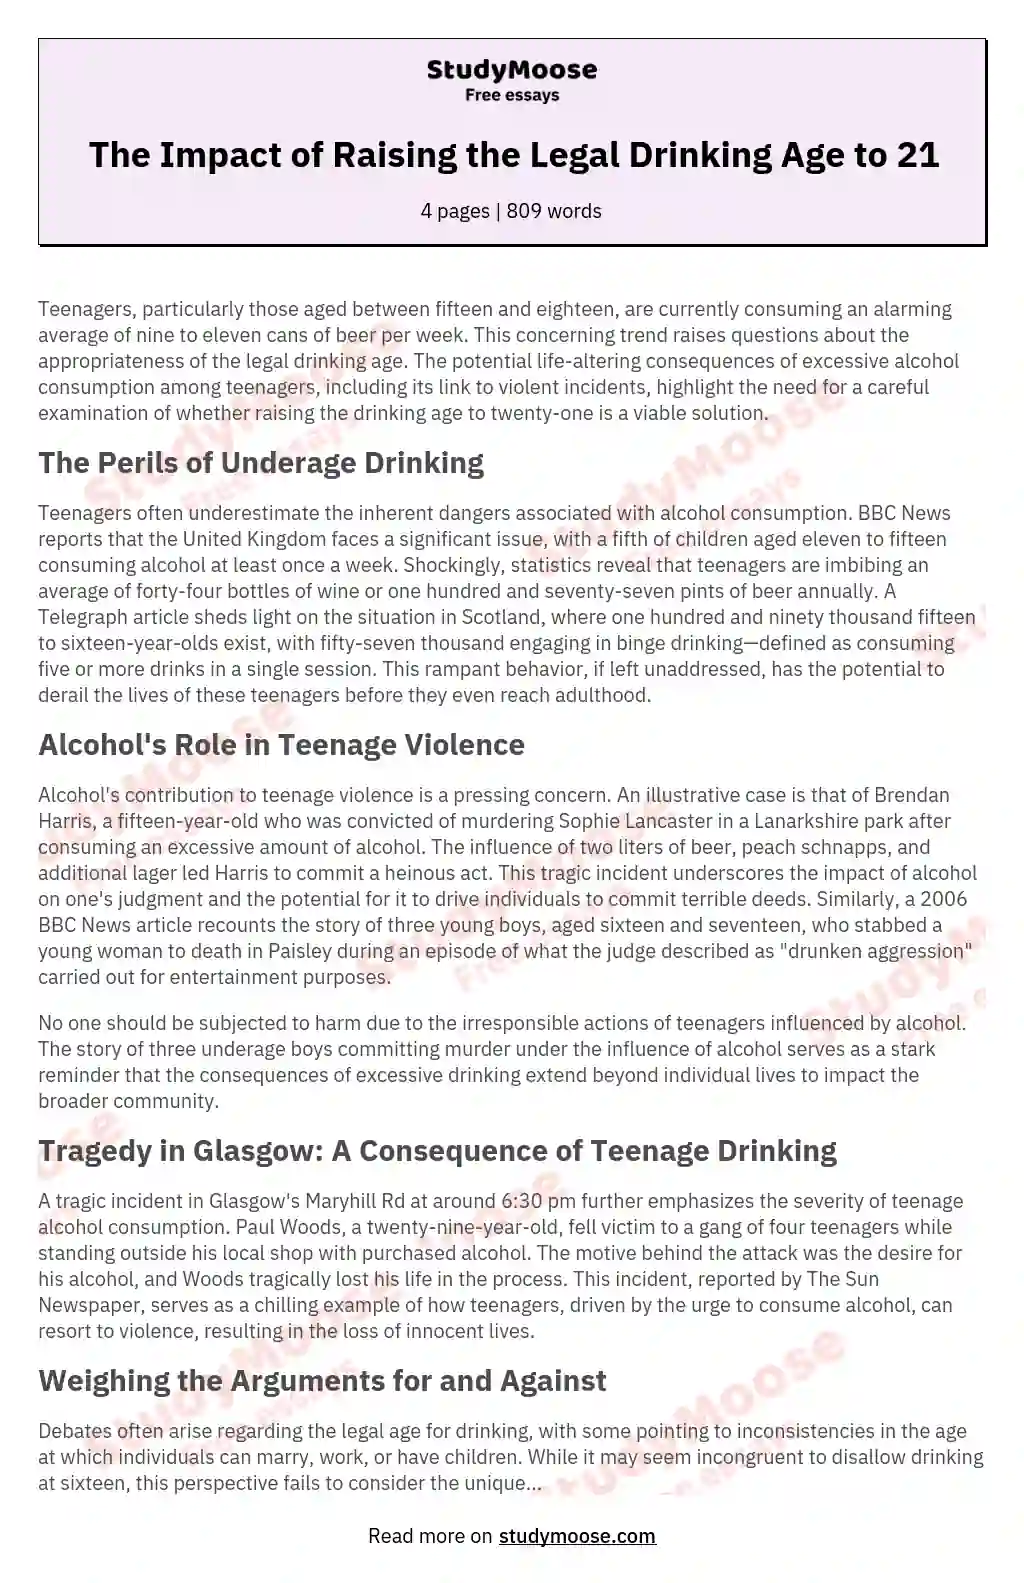 sample essay on legal drinking age in the u.s